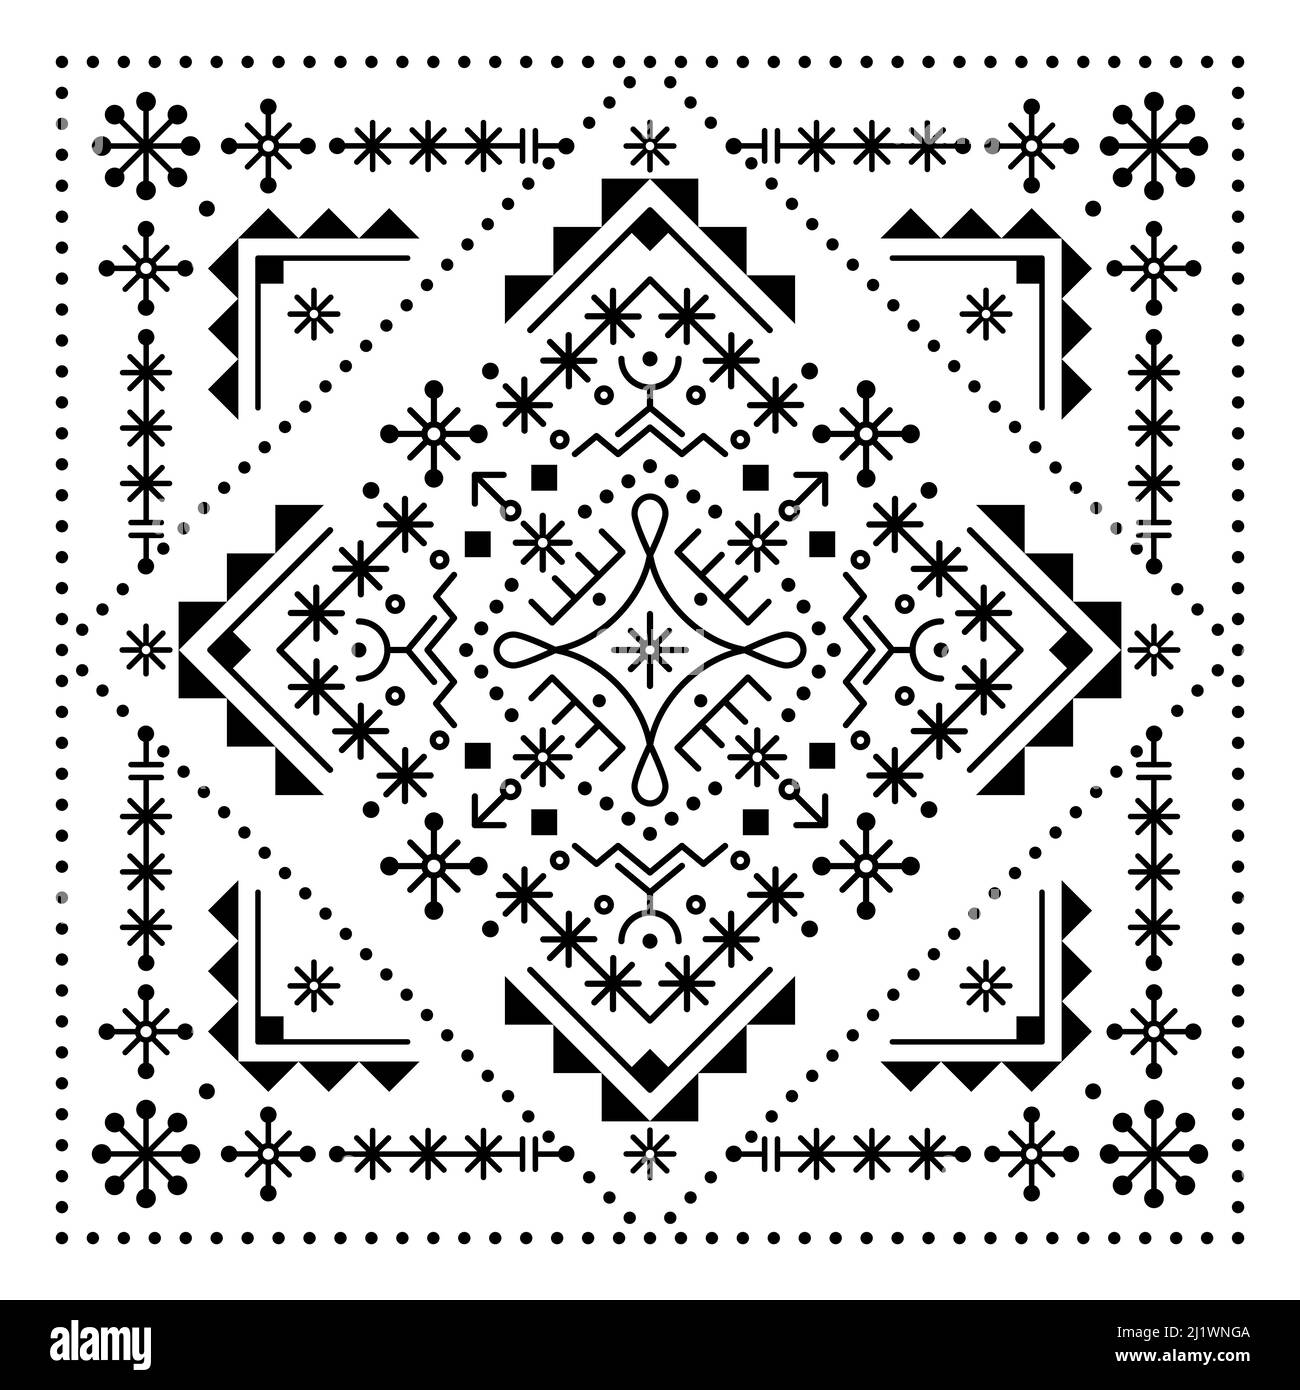 Tribal line vector greeting card or invitation design in square, geometric pattern inspired by Icelandic rune art Stock Vector